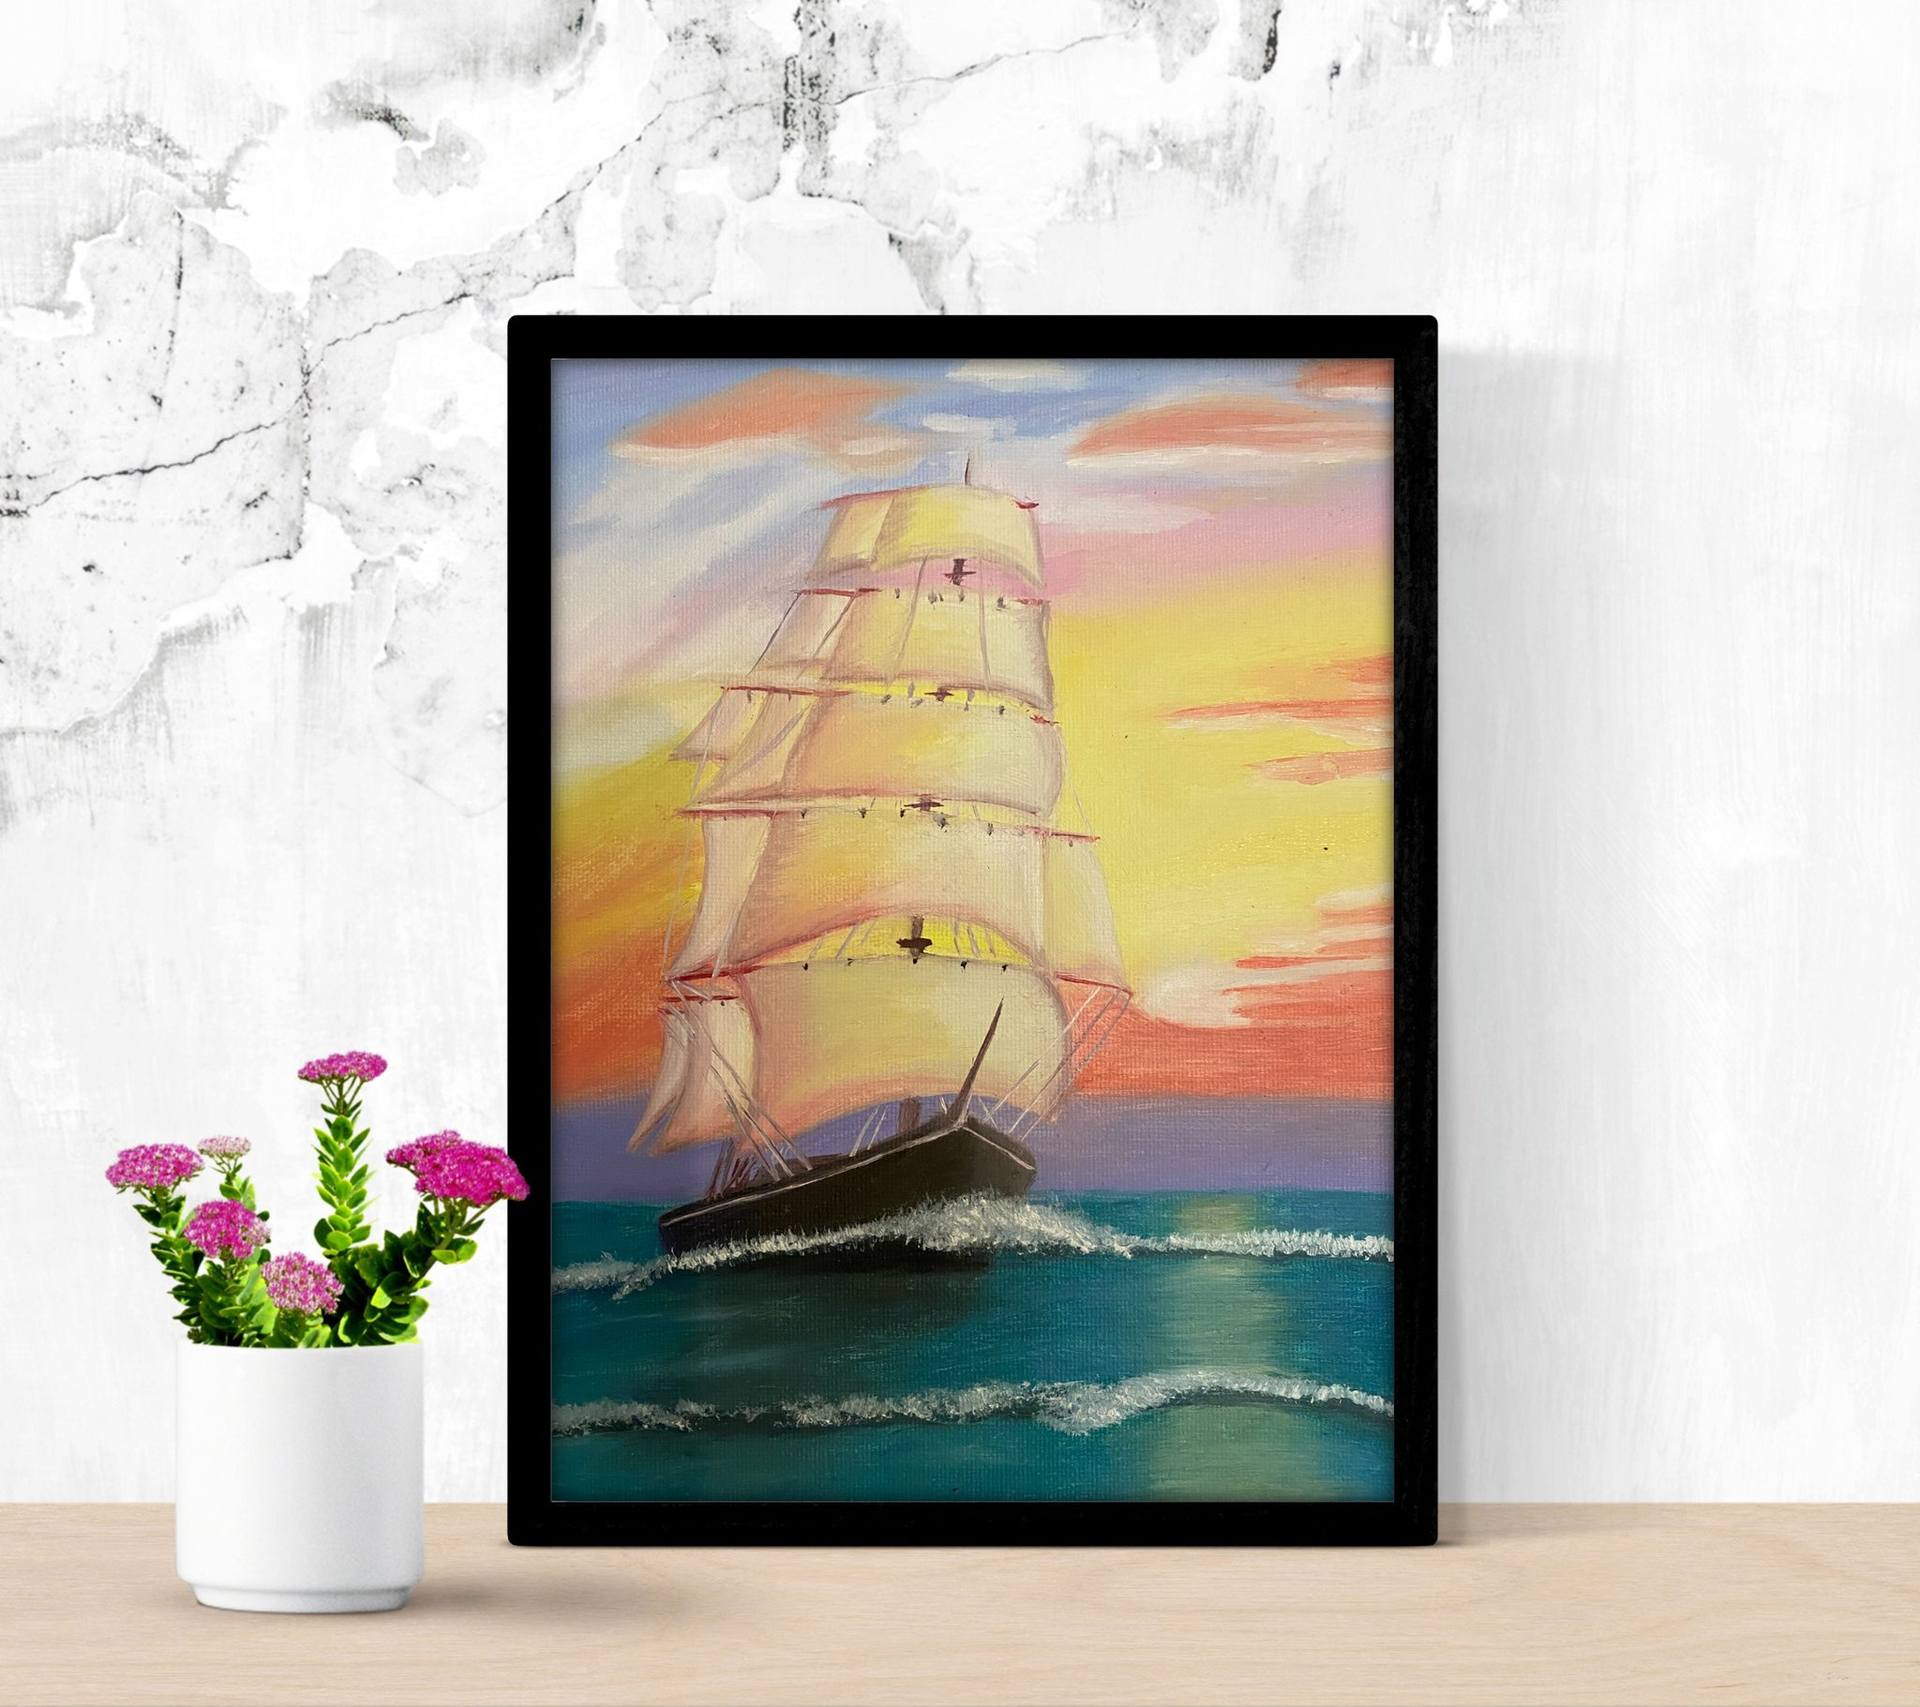 CHOP577 handing sunshade lady on boat hand painted oil painting canvas art 